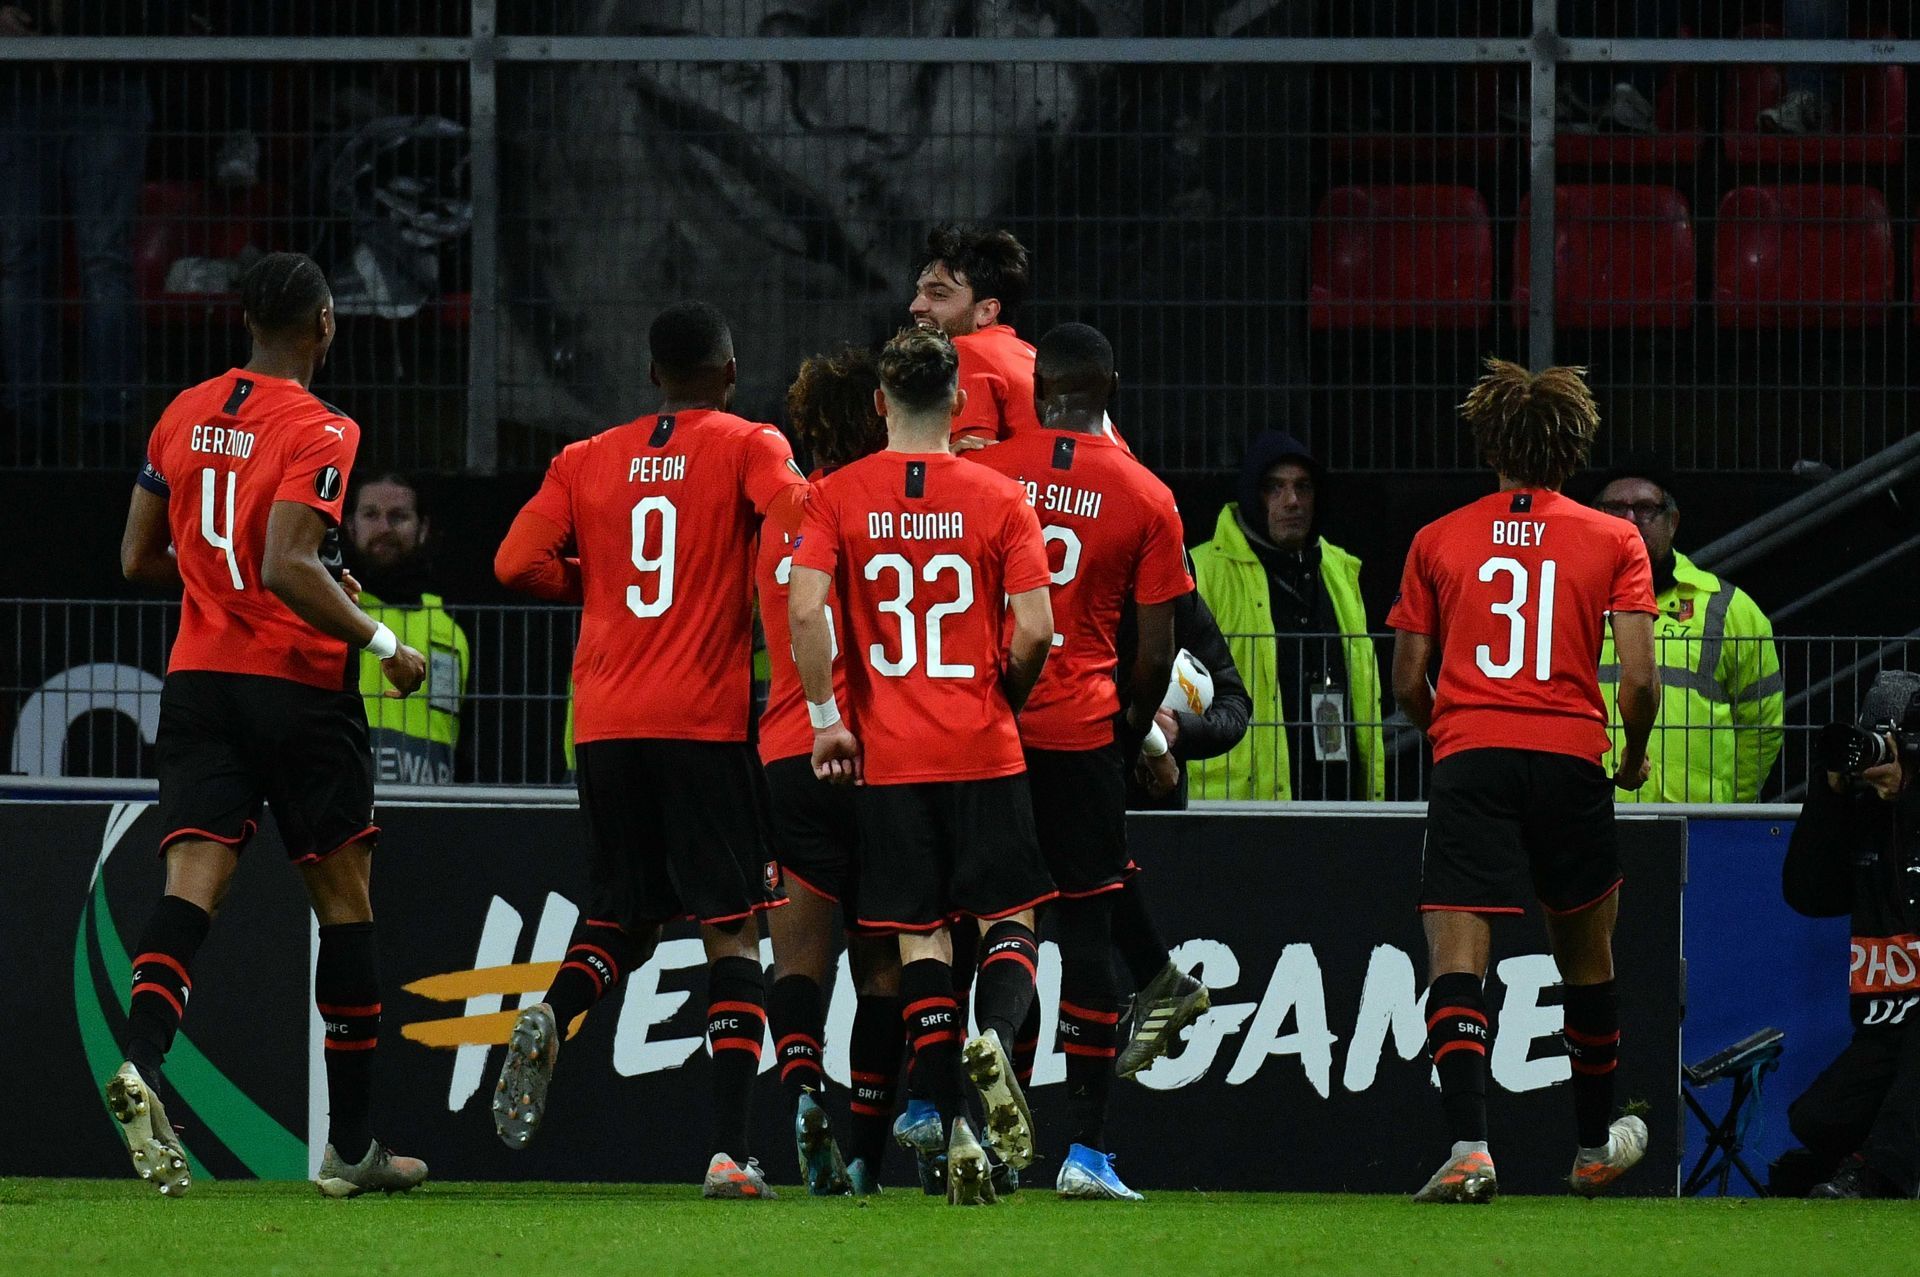 Stade Rennes will host Lille on Wednesday